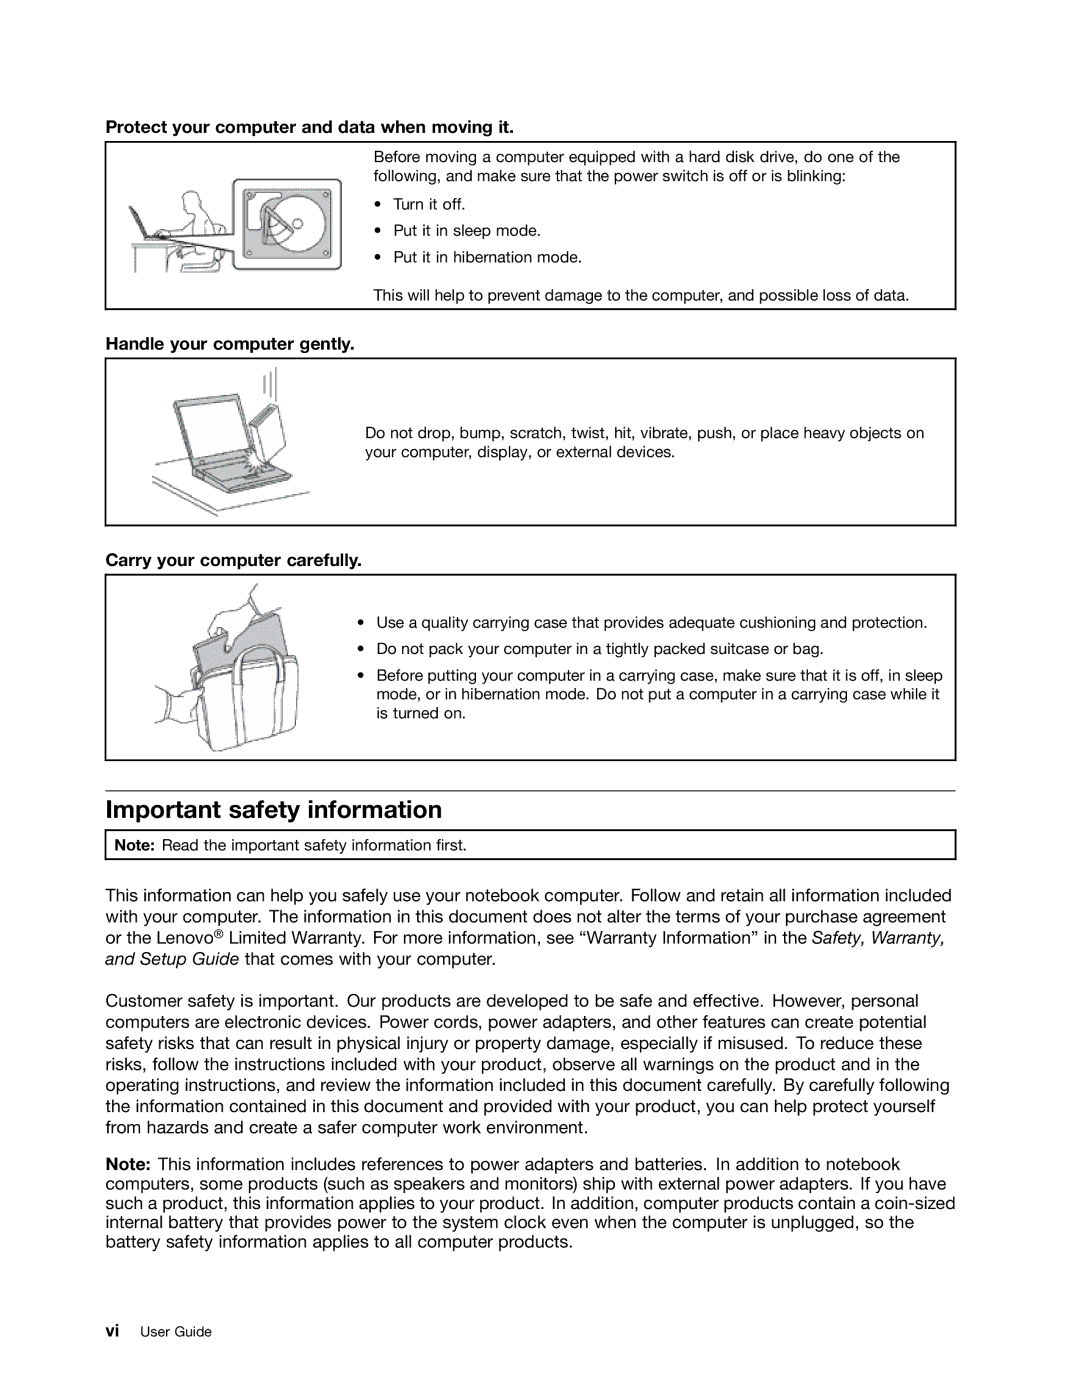 Lenovo 3259AD9 Important safety information, Protect your computer and data when moving it, Handle your computer gently 